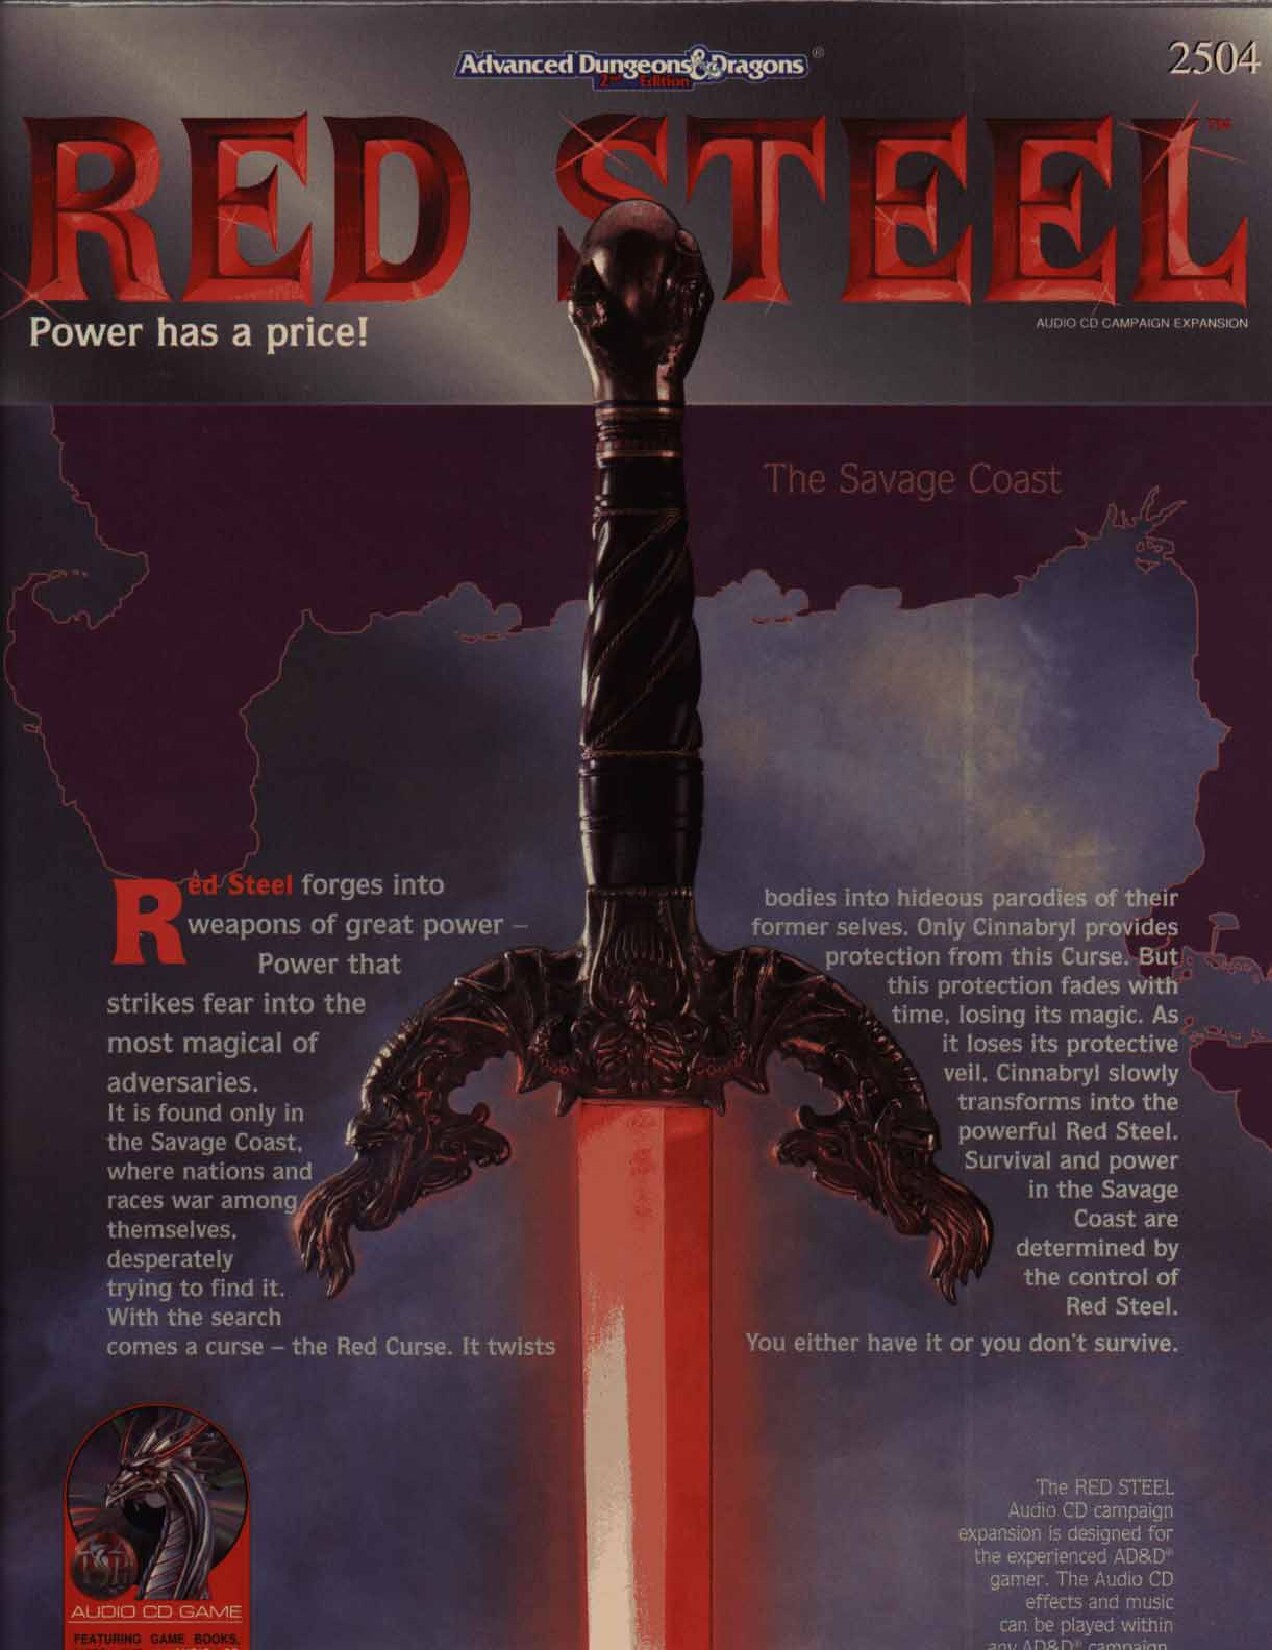 TSR 2504 Red Steel Campaign Expansion boxed set